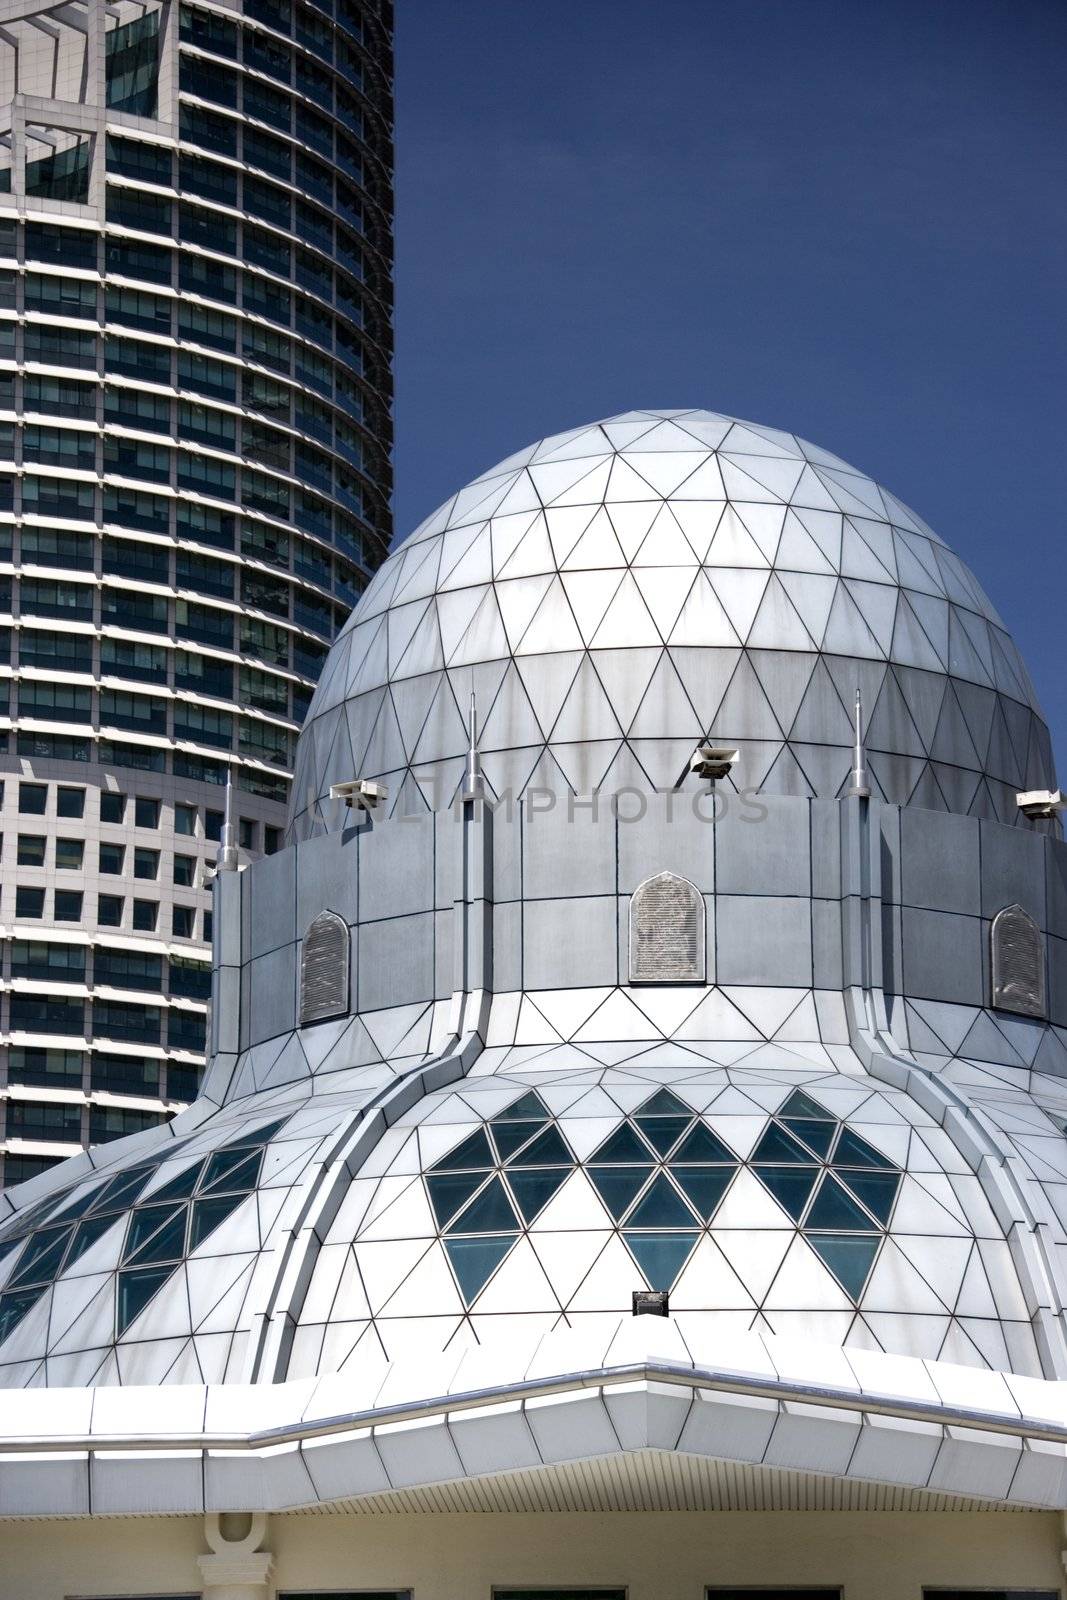 Dome of a modern designed mosque located at the Kuala Lumpur City Centre, Malaysia.